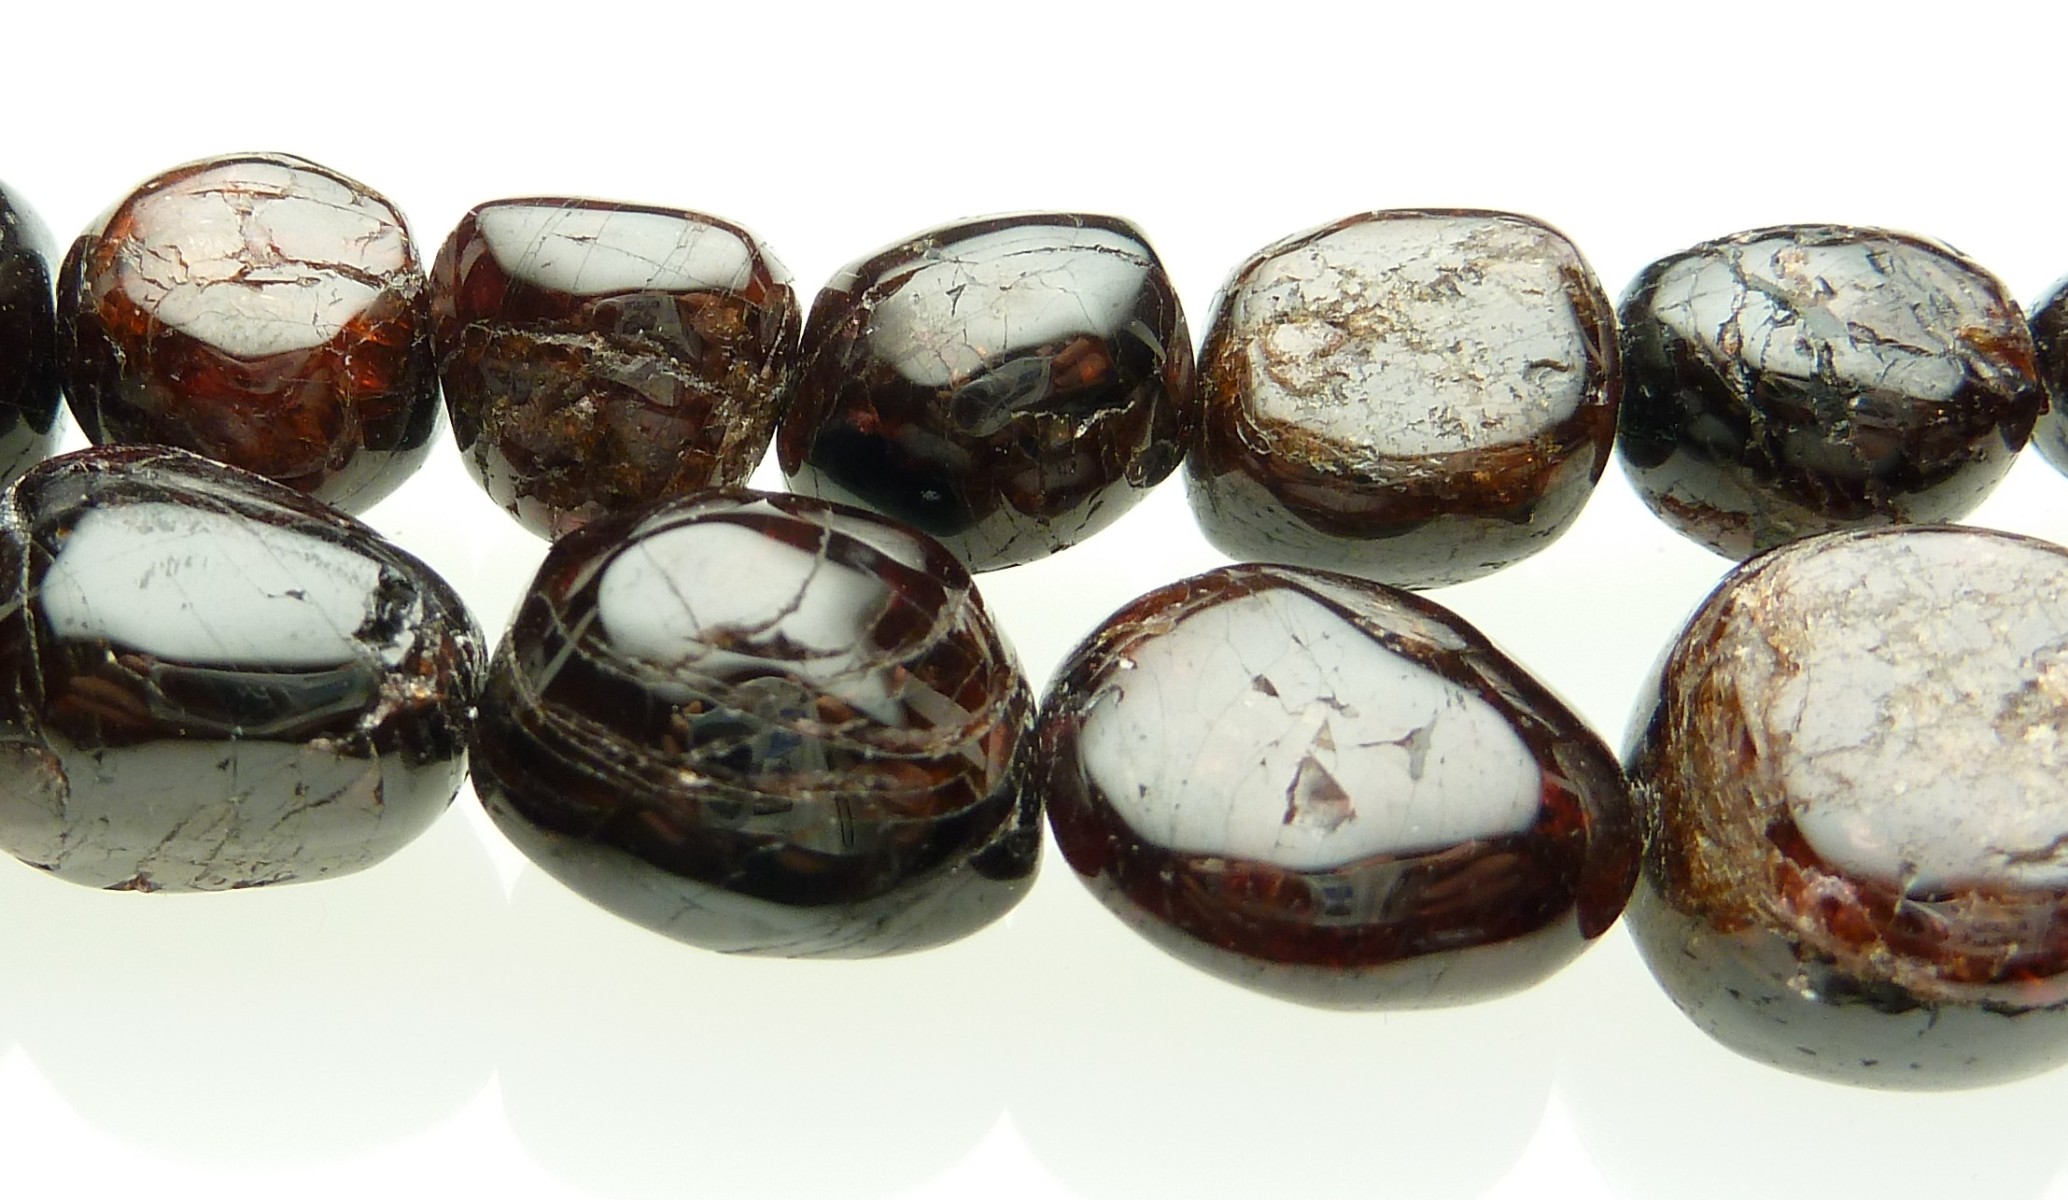 Scaled image P1020179.JPG: Item #GarnNug2. Dark opaque garnet nuggets vary in size from 15x11 to 15x13mm. Price $28.00 per strand. Length 15.5 inches. P1020307.JPG ----Item # AmazOval. Large amazonite ovals. Beautiful rich springtime color. Price $ per strand. Length 16 inches.  � 